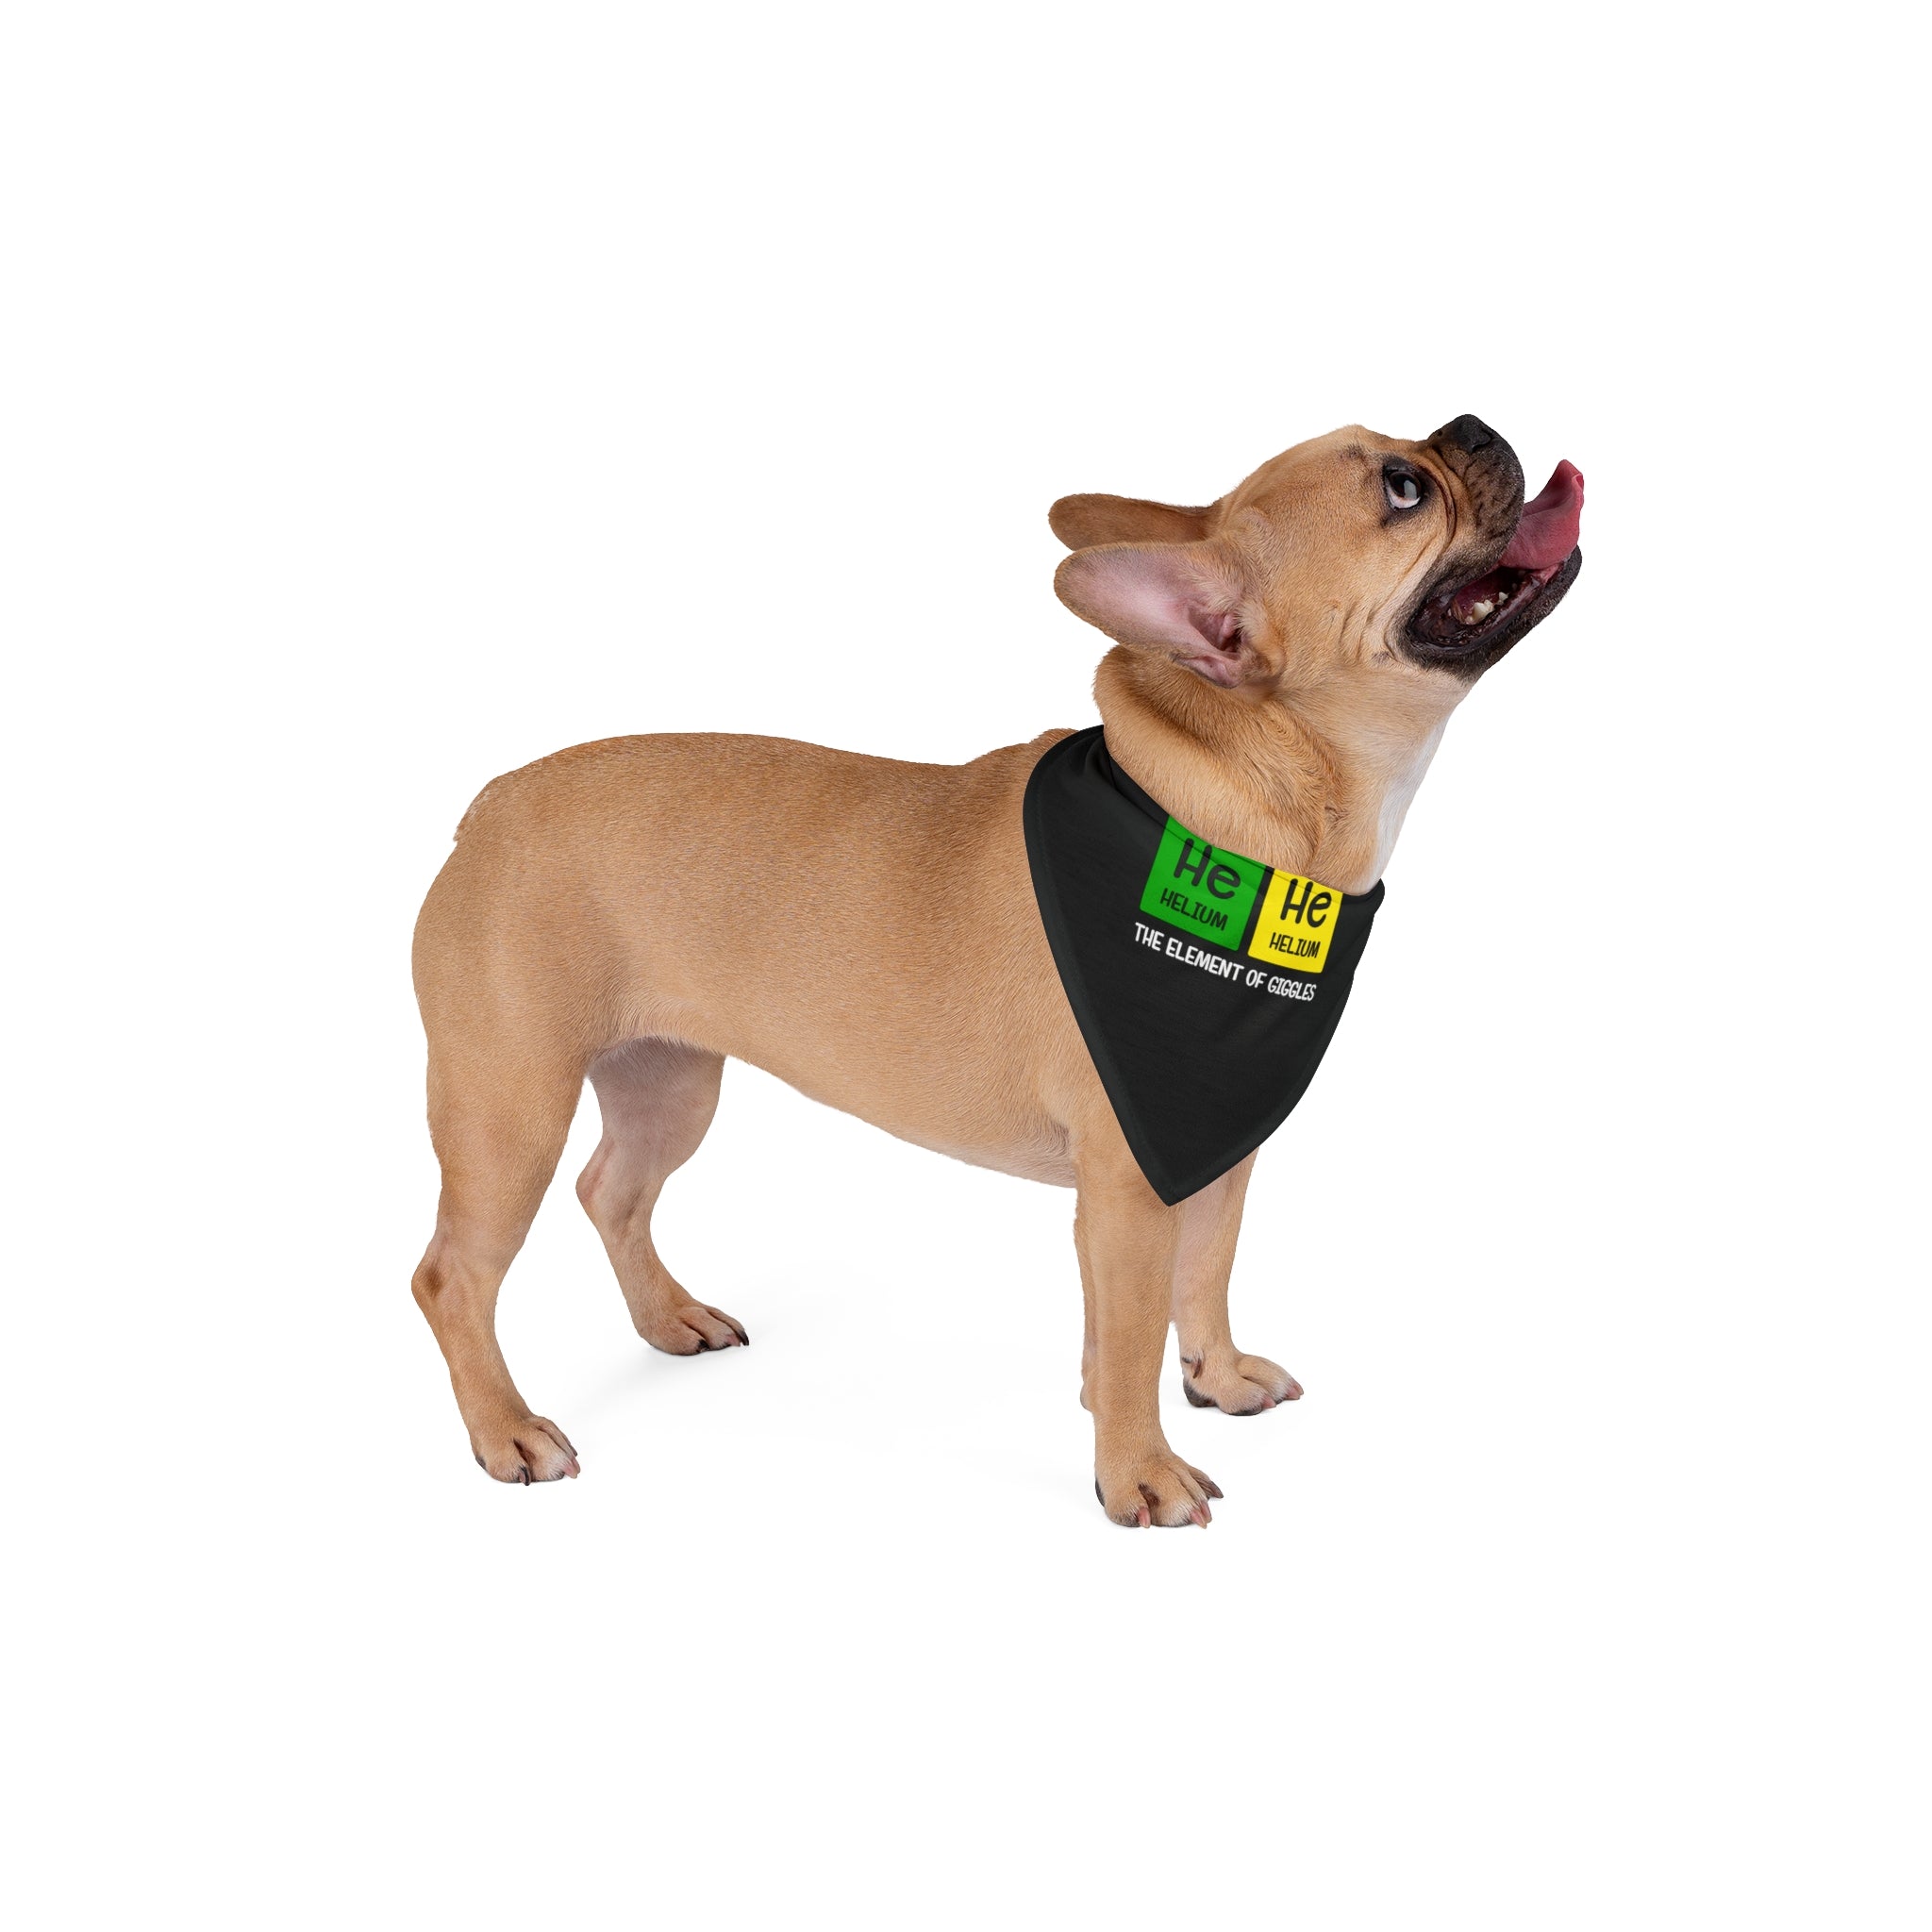 A tan French Bulldog sporting a chic He-He - Pet Bandana on a soft-spun polyester bandana that reads "He He Helium, The Element of Cheer" looks up with its tongue out.